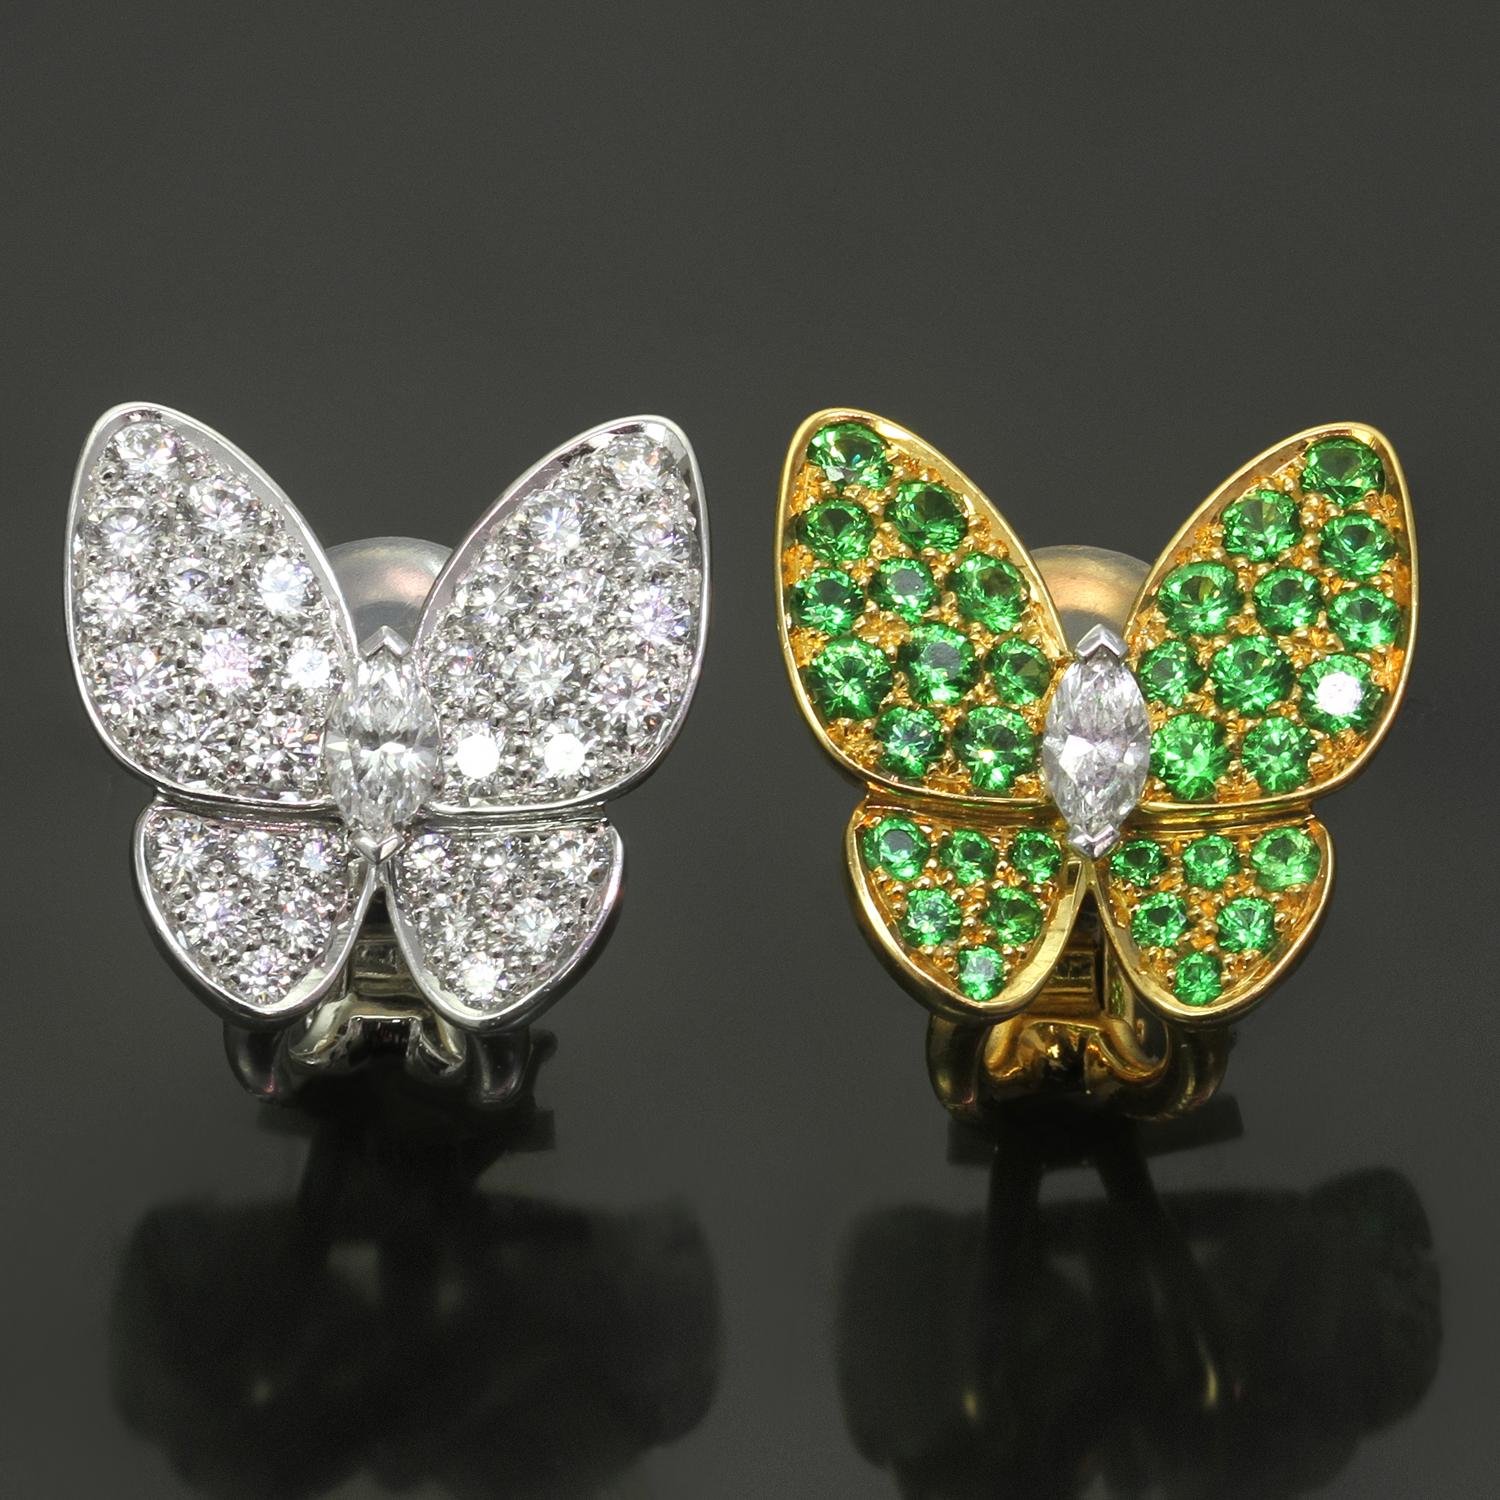 These magnificent Van Cleef & Arpels clip-on earrings feature an elegant butterfly design with one earring crafted in 18k yellow gold and set with green tsavorite stones weighing an estimated 1.0 carats and another earring made in 18k white gold and